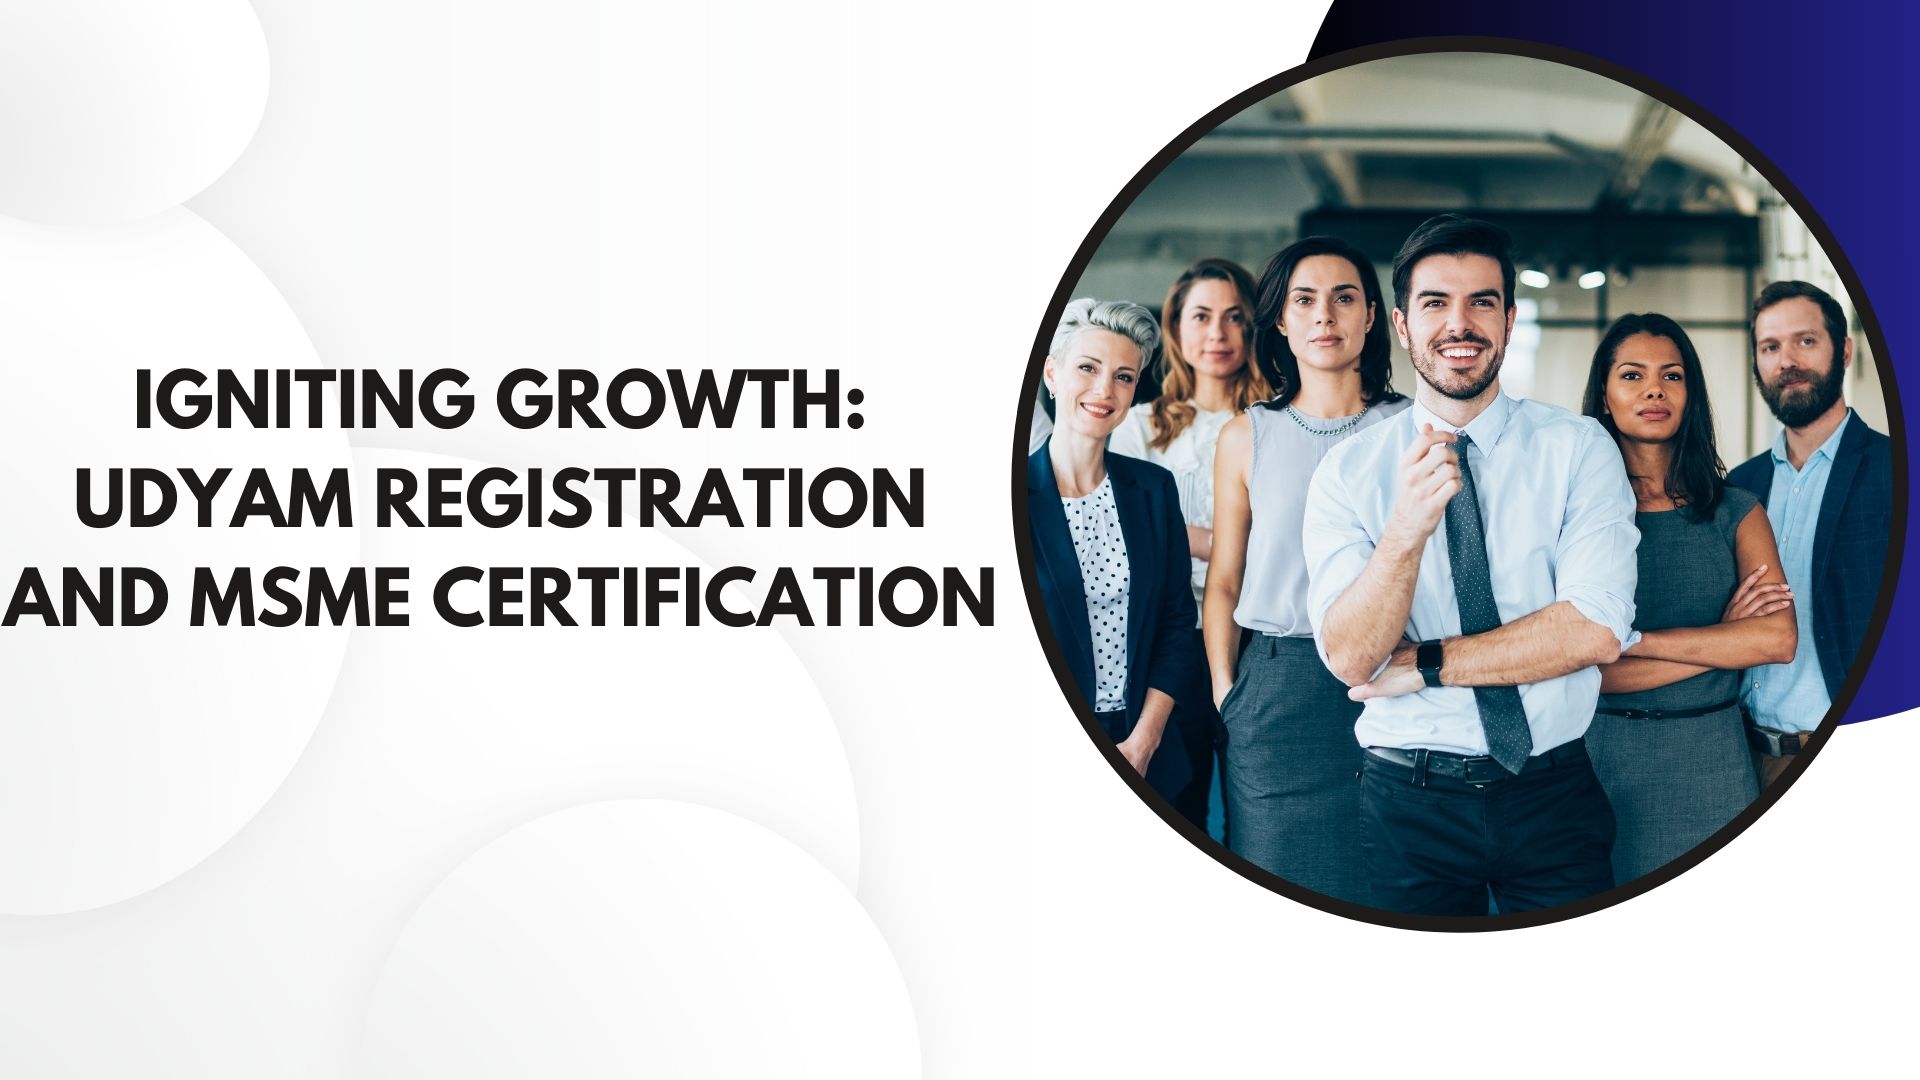 Igniting Growth: Udyam Registration and MSME Certification